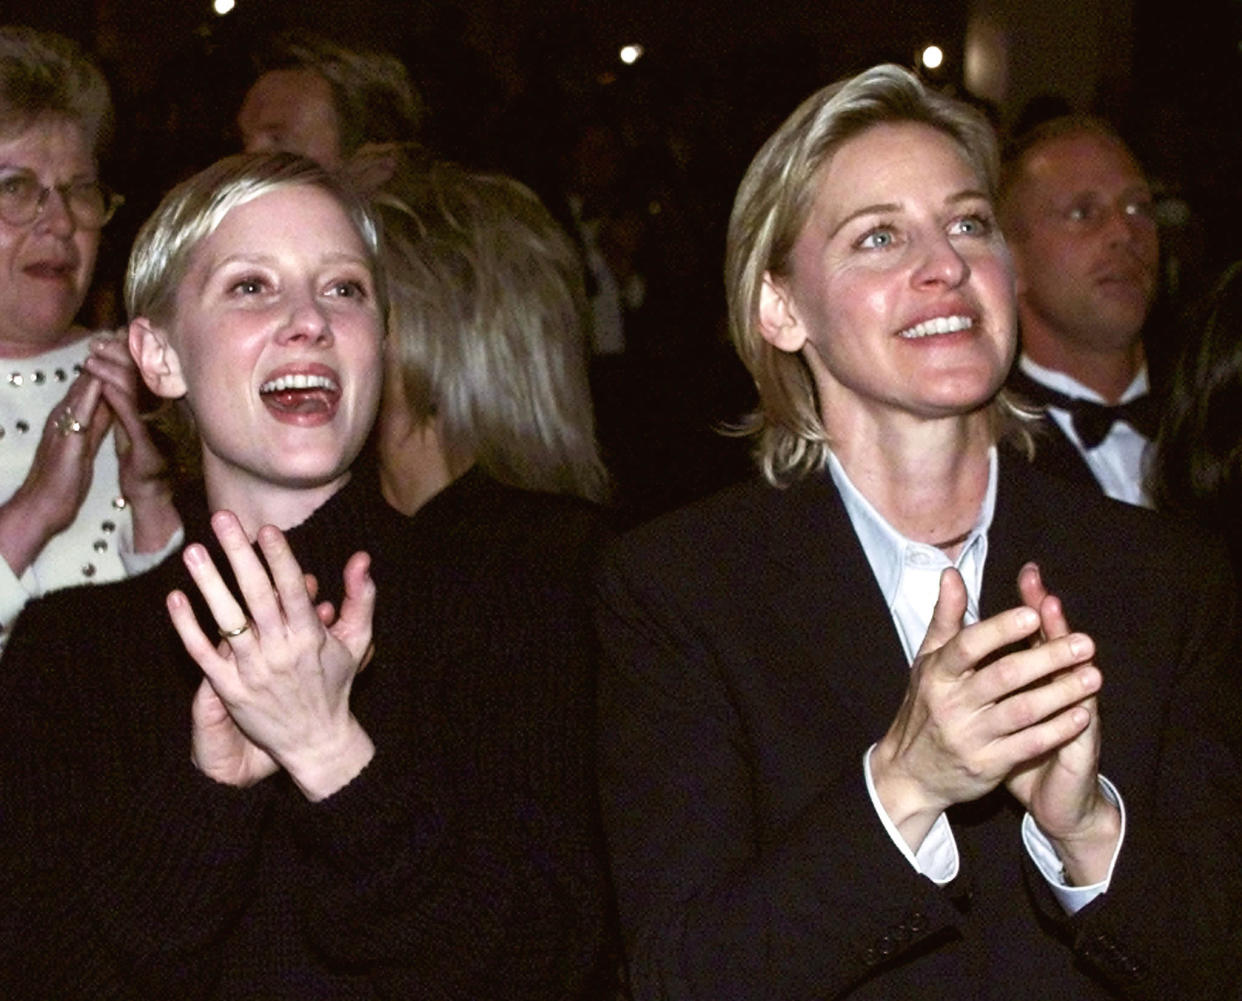 Actresses Anne Heche (L) and Ellen Degeneres applaud after U.S. President Bill Clinton makes remarks in Los Angeles, October 2, 1999. The president was attending an Access Now For Gay and Lesbian Equality fundraiser.
**DIGITAL IMAGE**